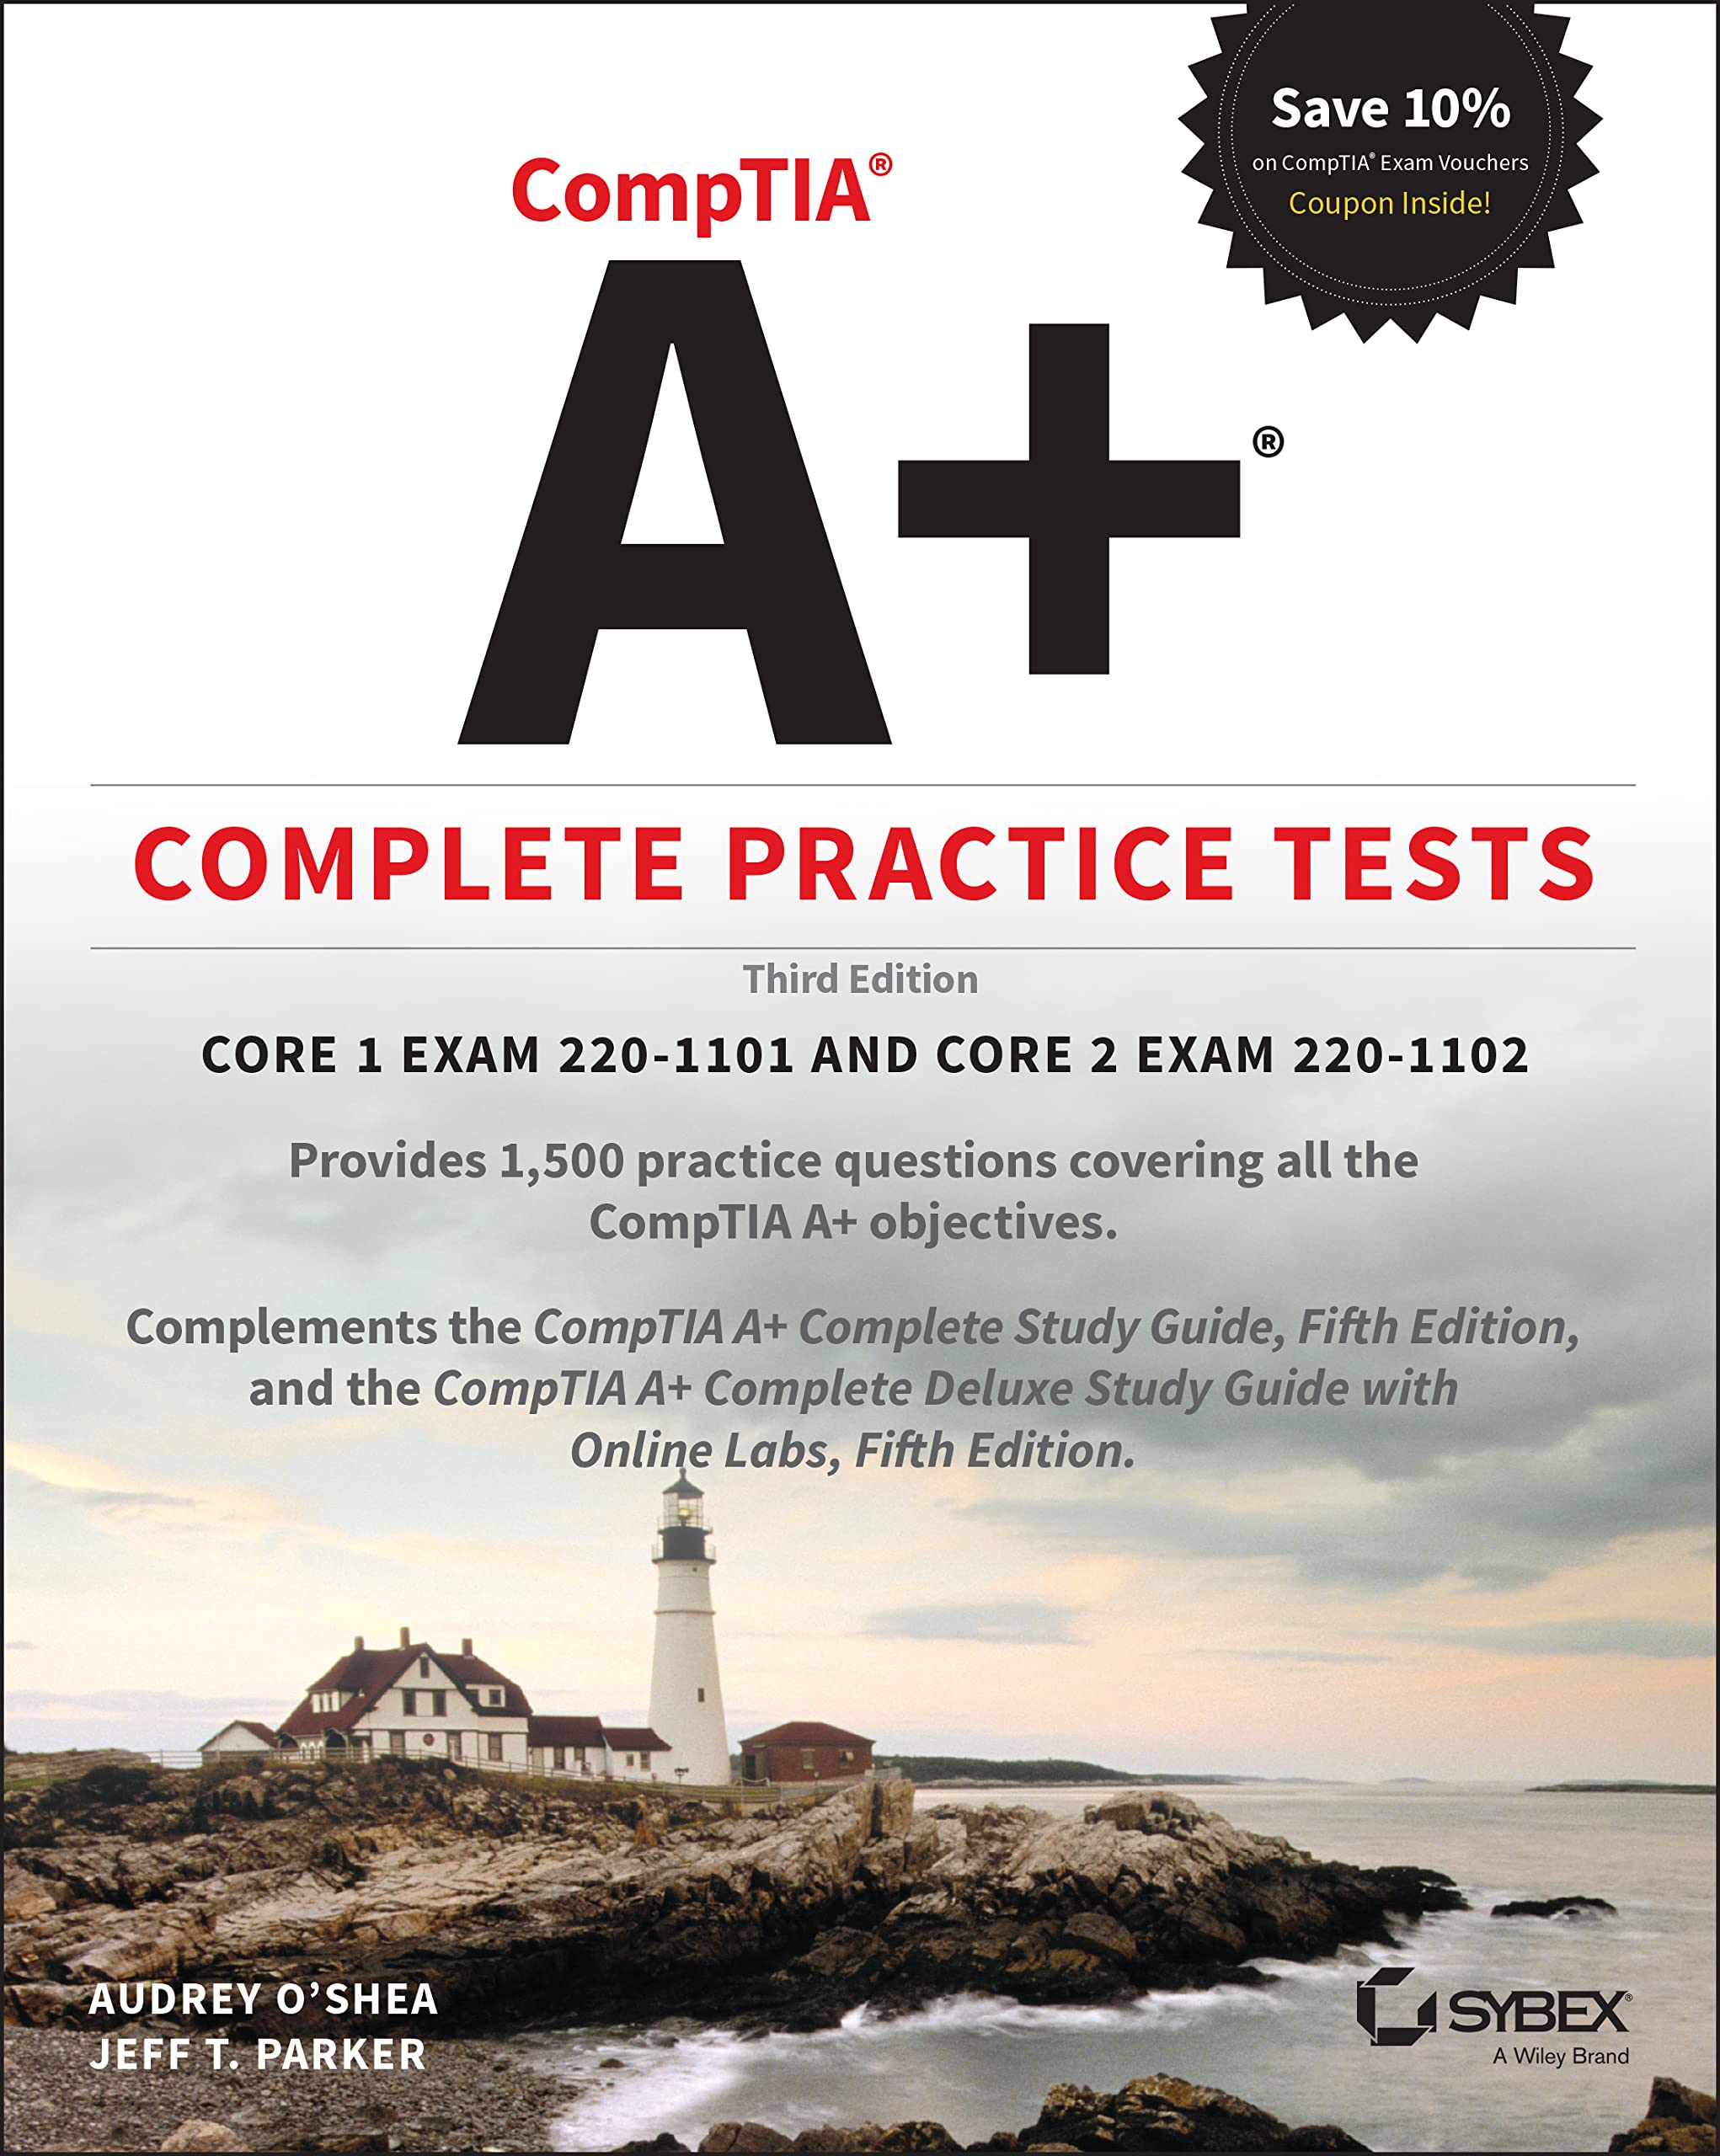 CompTIA A+ Complete Practice Tests SureShot Books